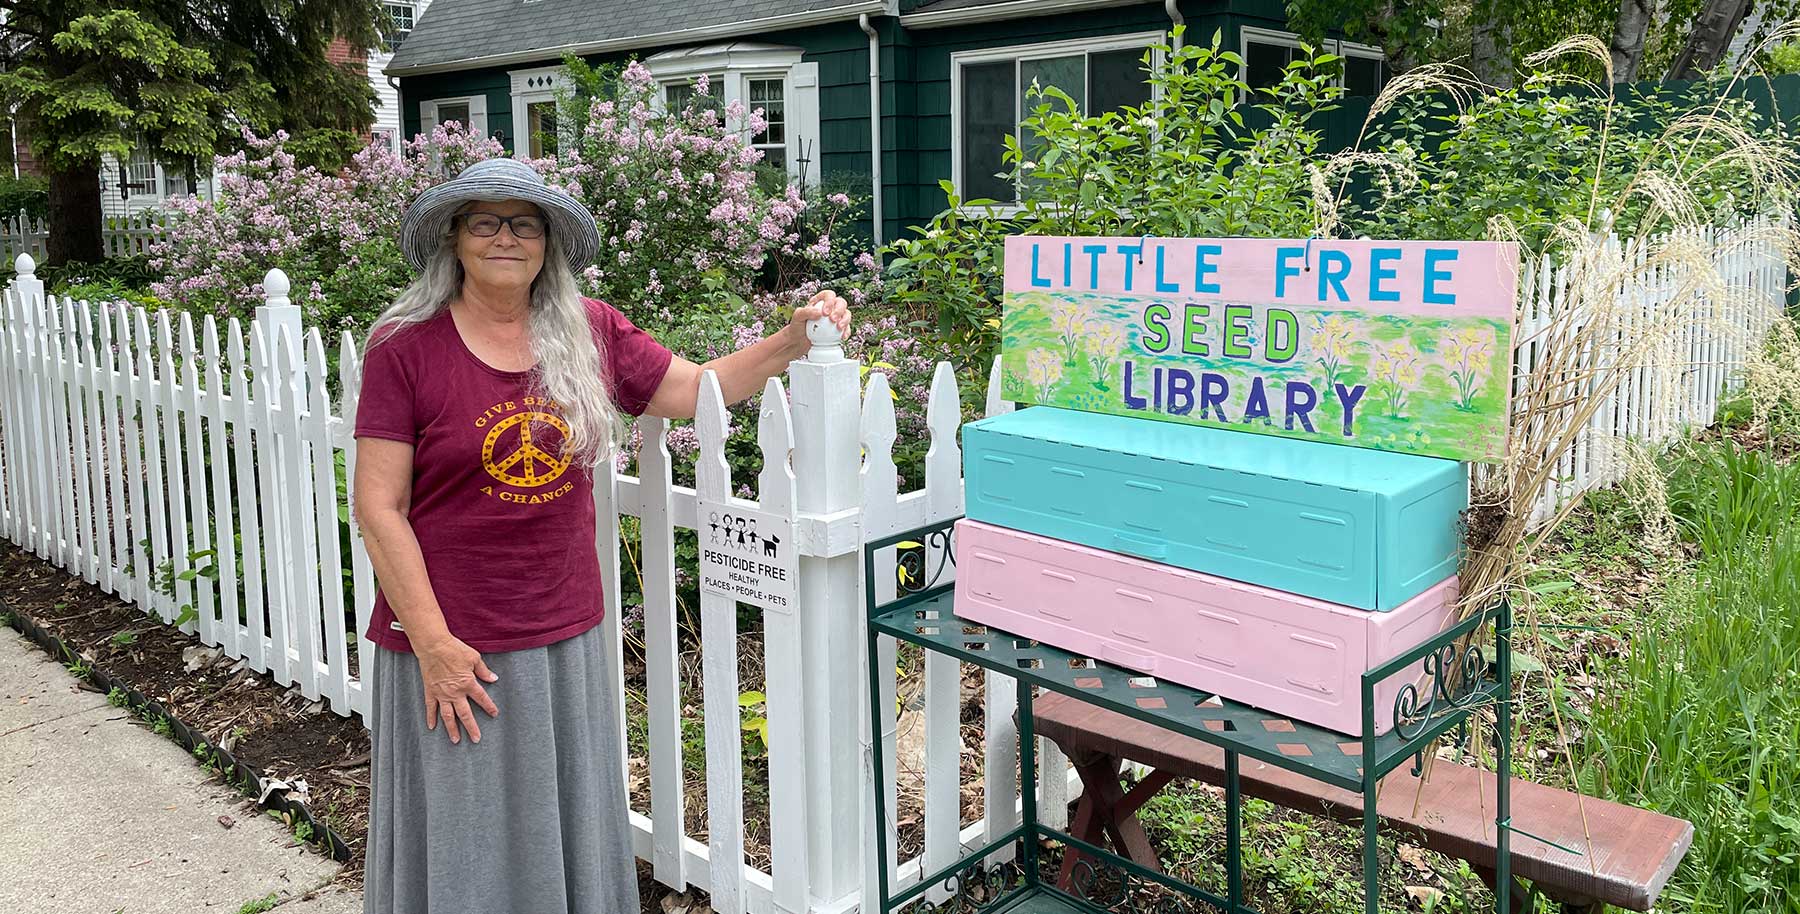 Suzanne De Young and her Little Free Seed Library